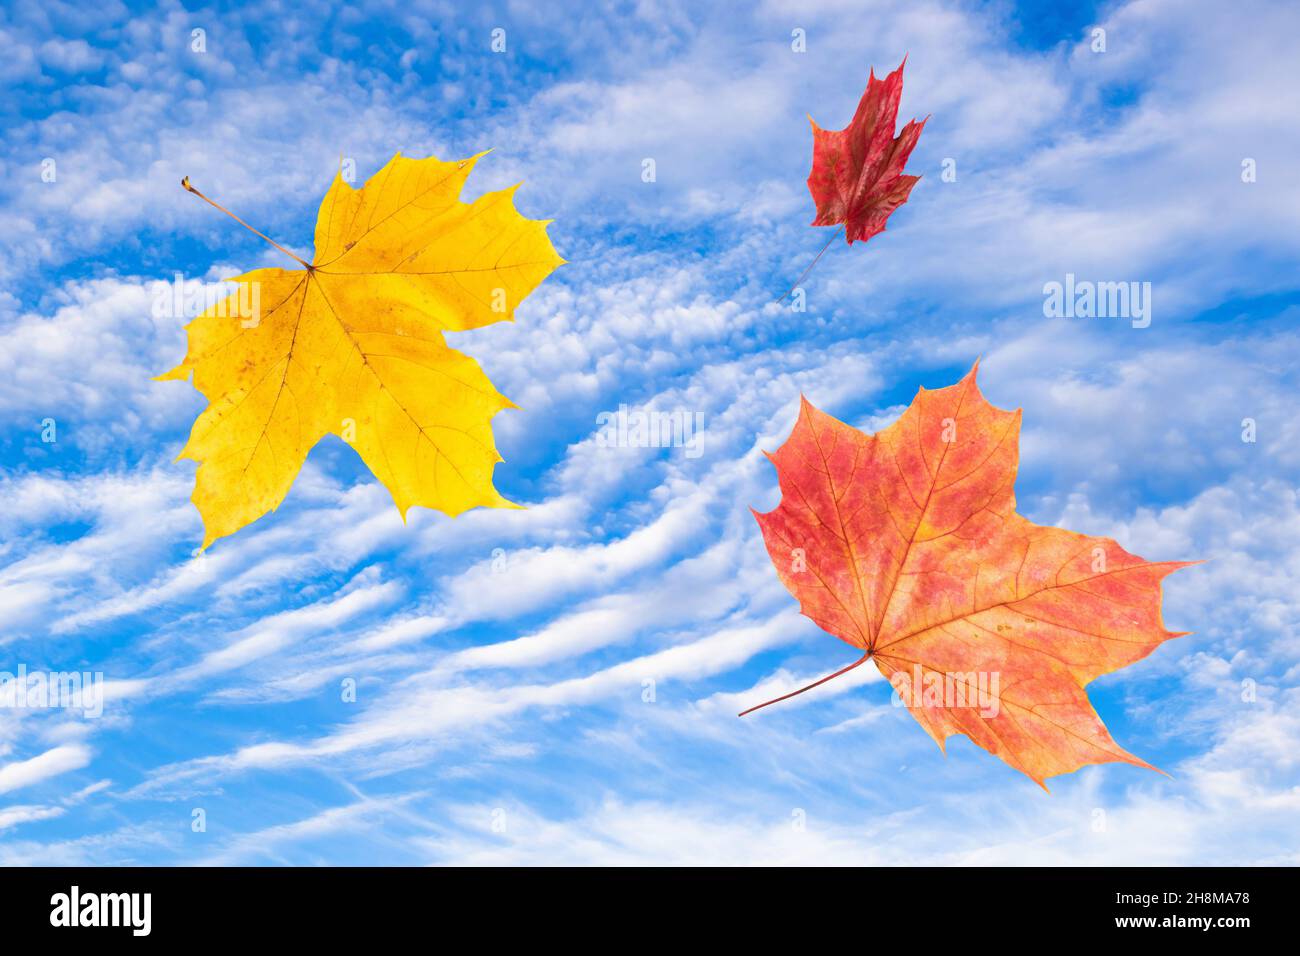 Circling multi-colored maple leaves in a blue sky with picturesque clouds Stock Photo